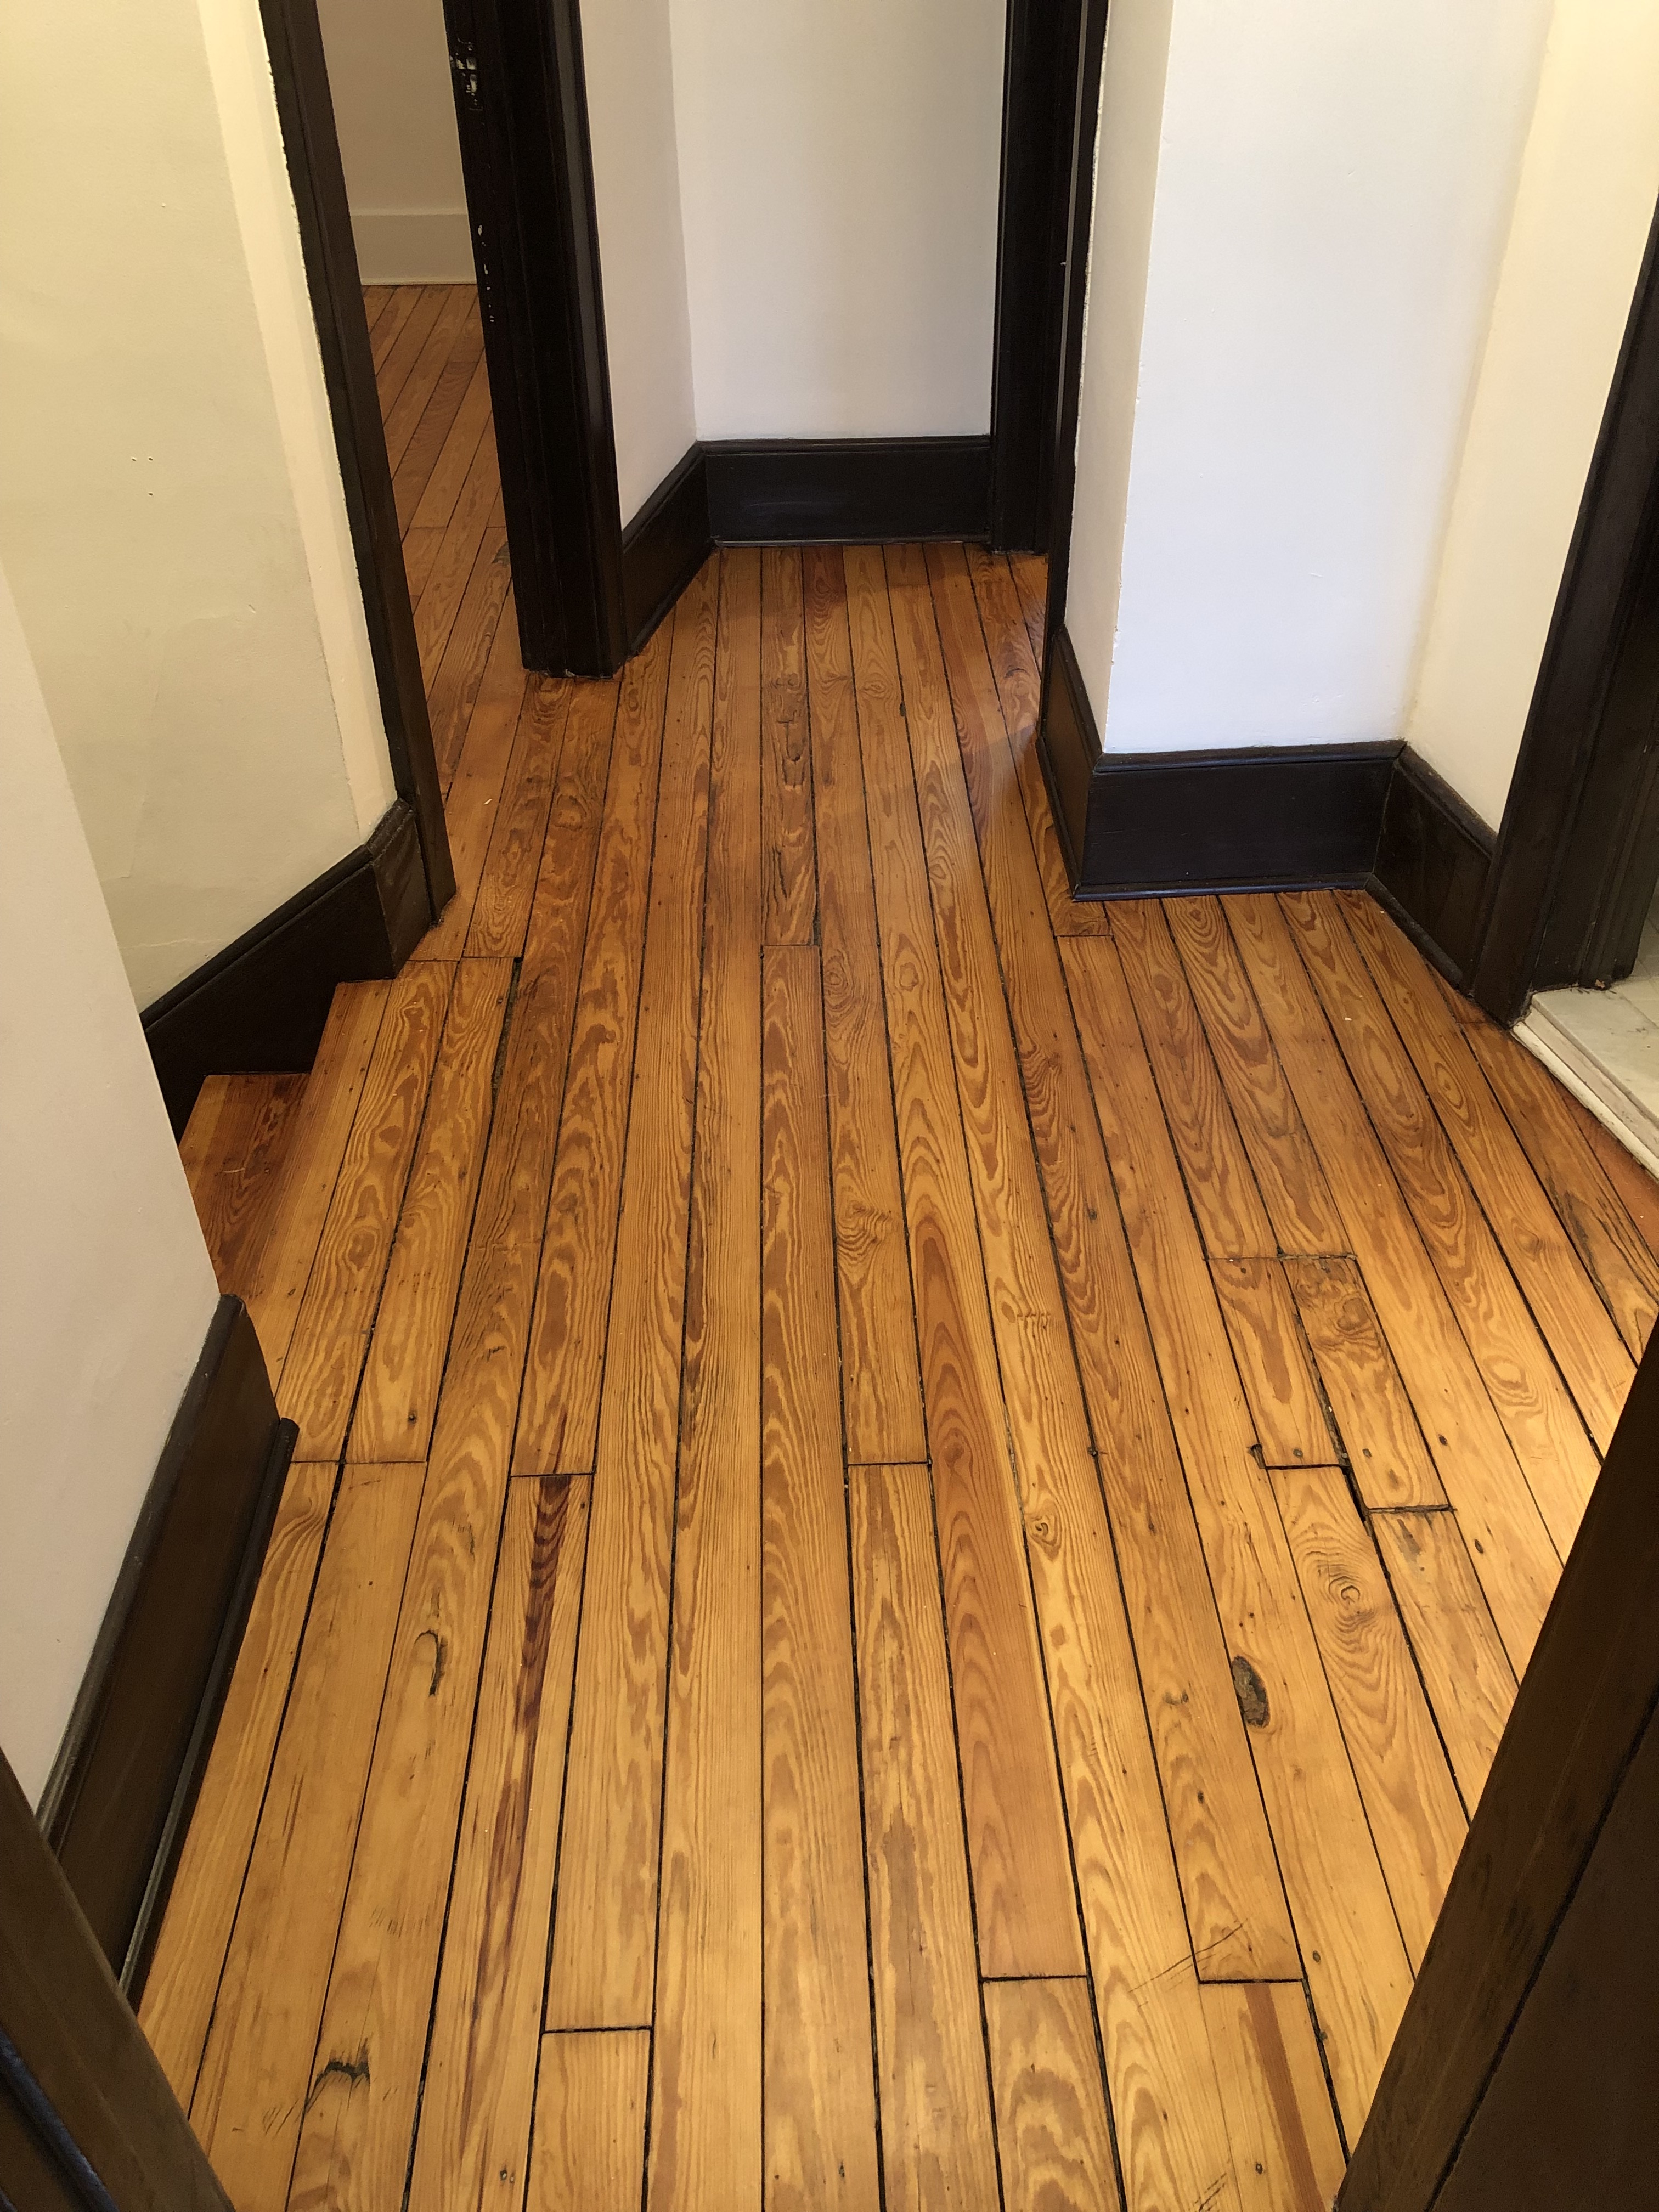 How To Refinish Hardwood Floors Step, How To Refinish Hardwood Floors Yourself